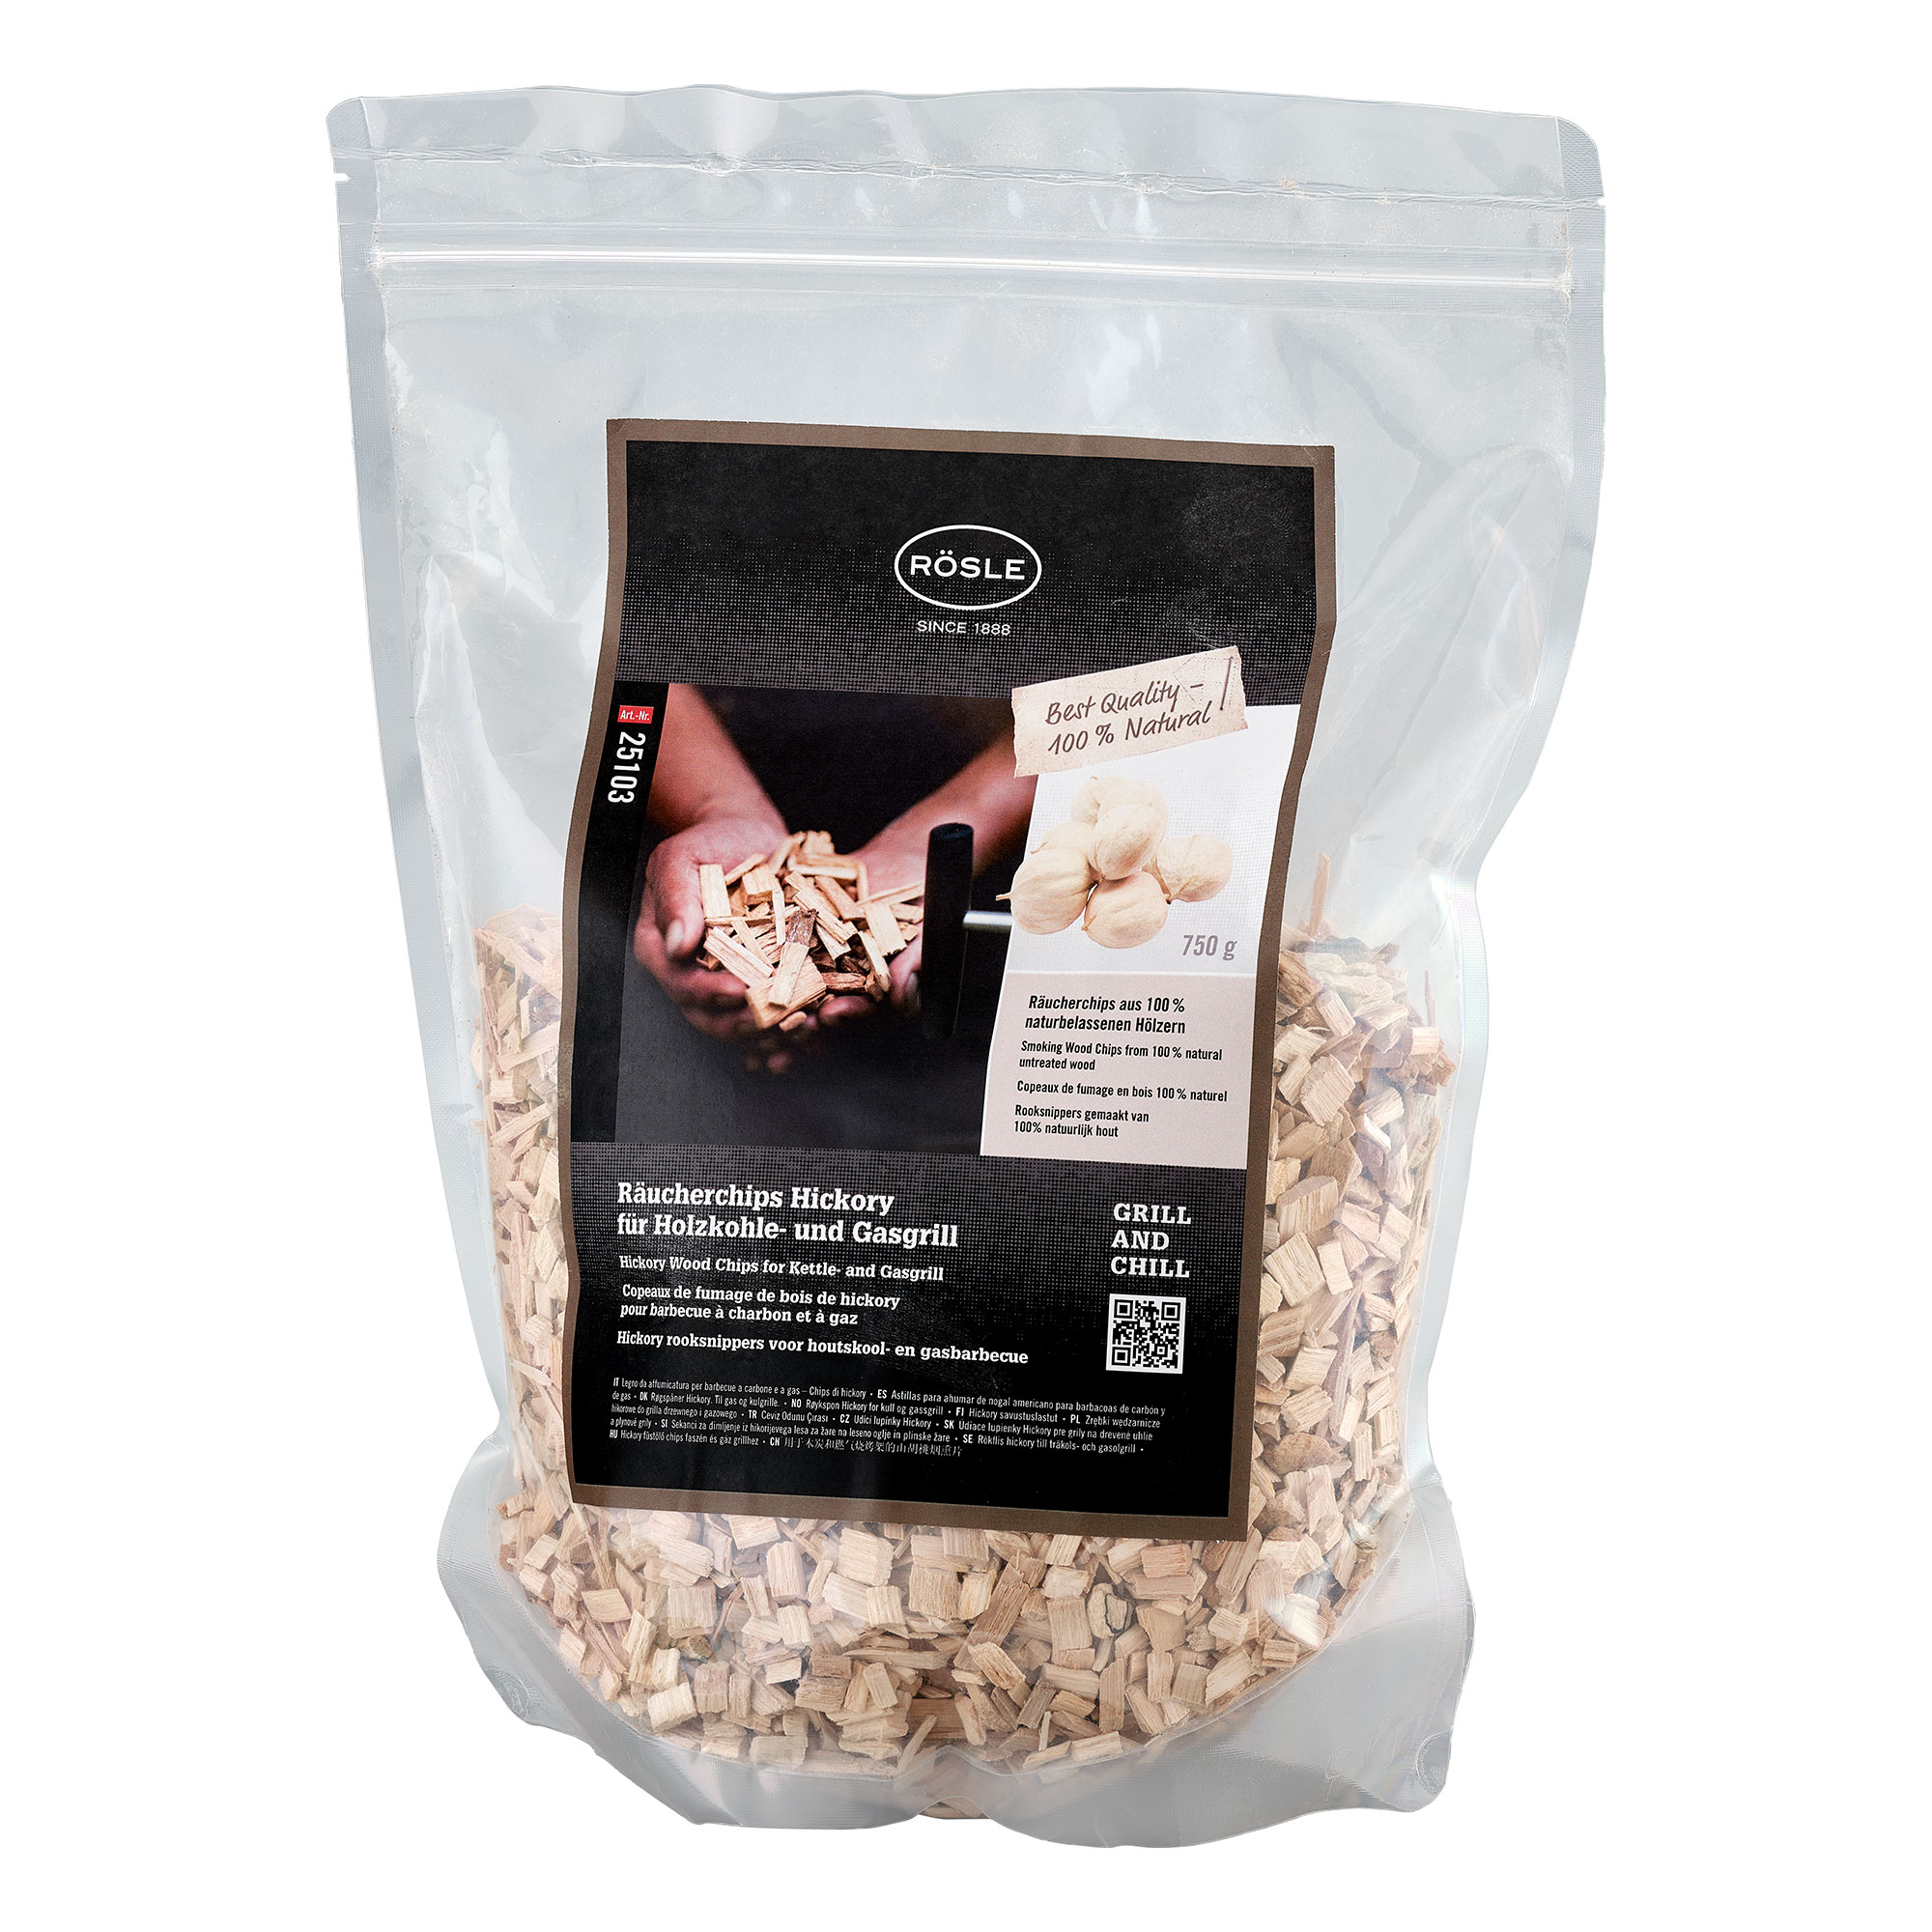 Hickory Wood Chips 750 g|1.65 lbs